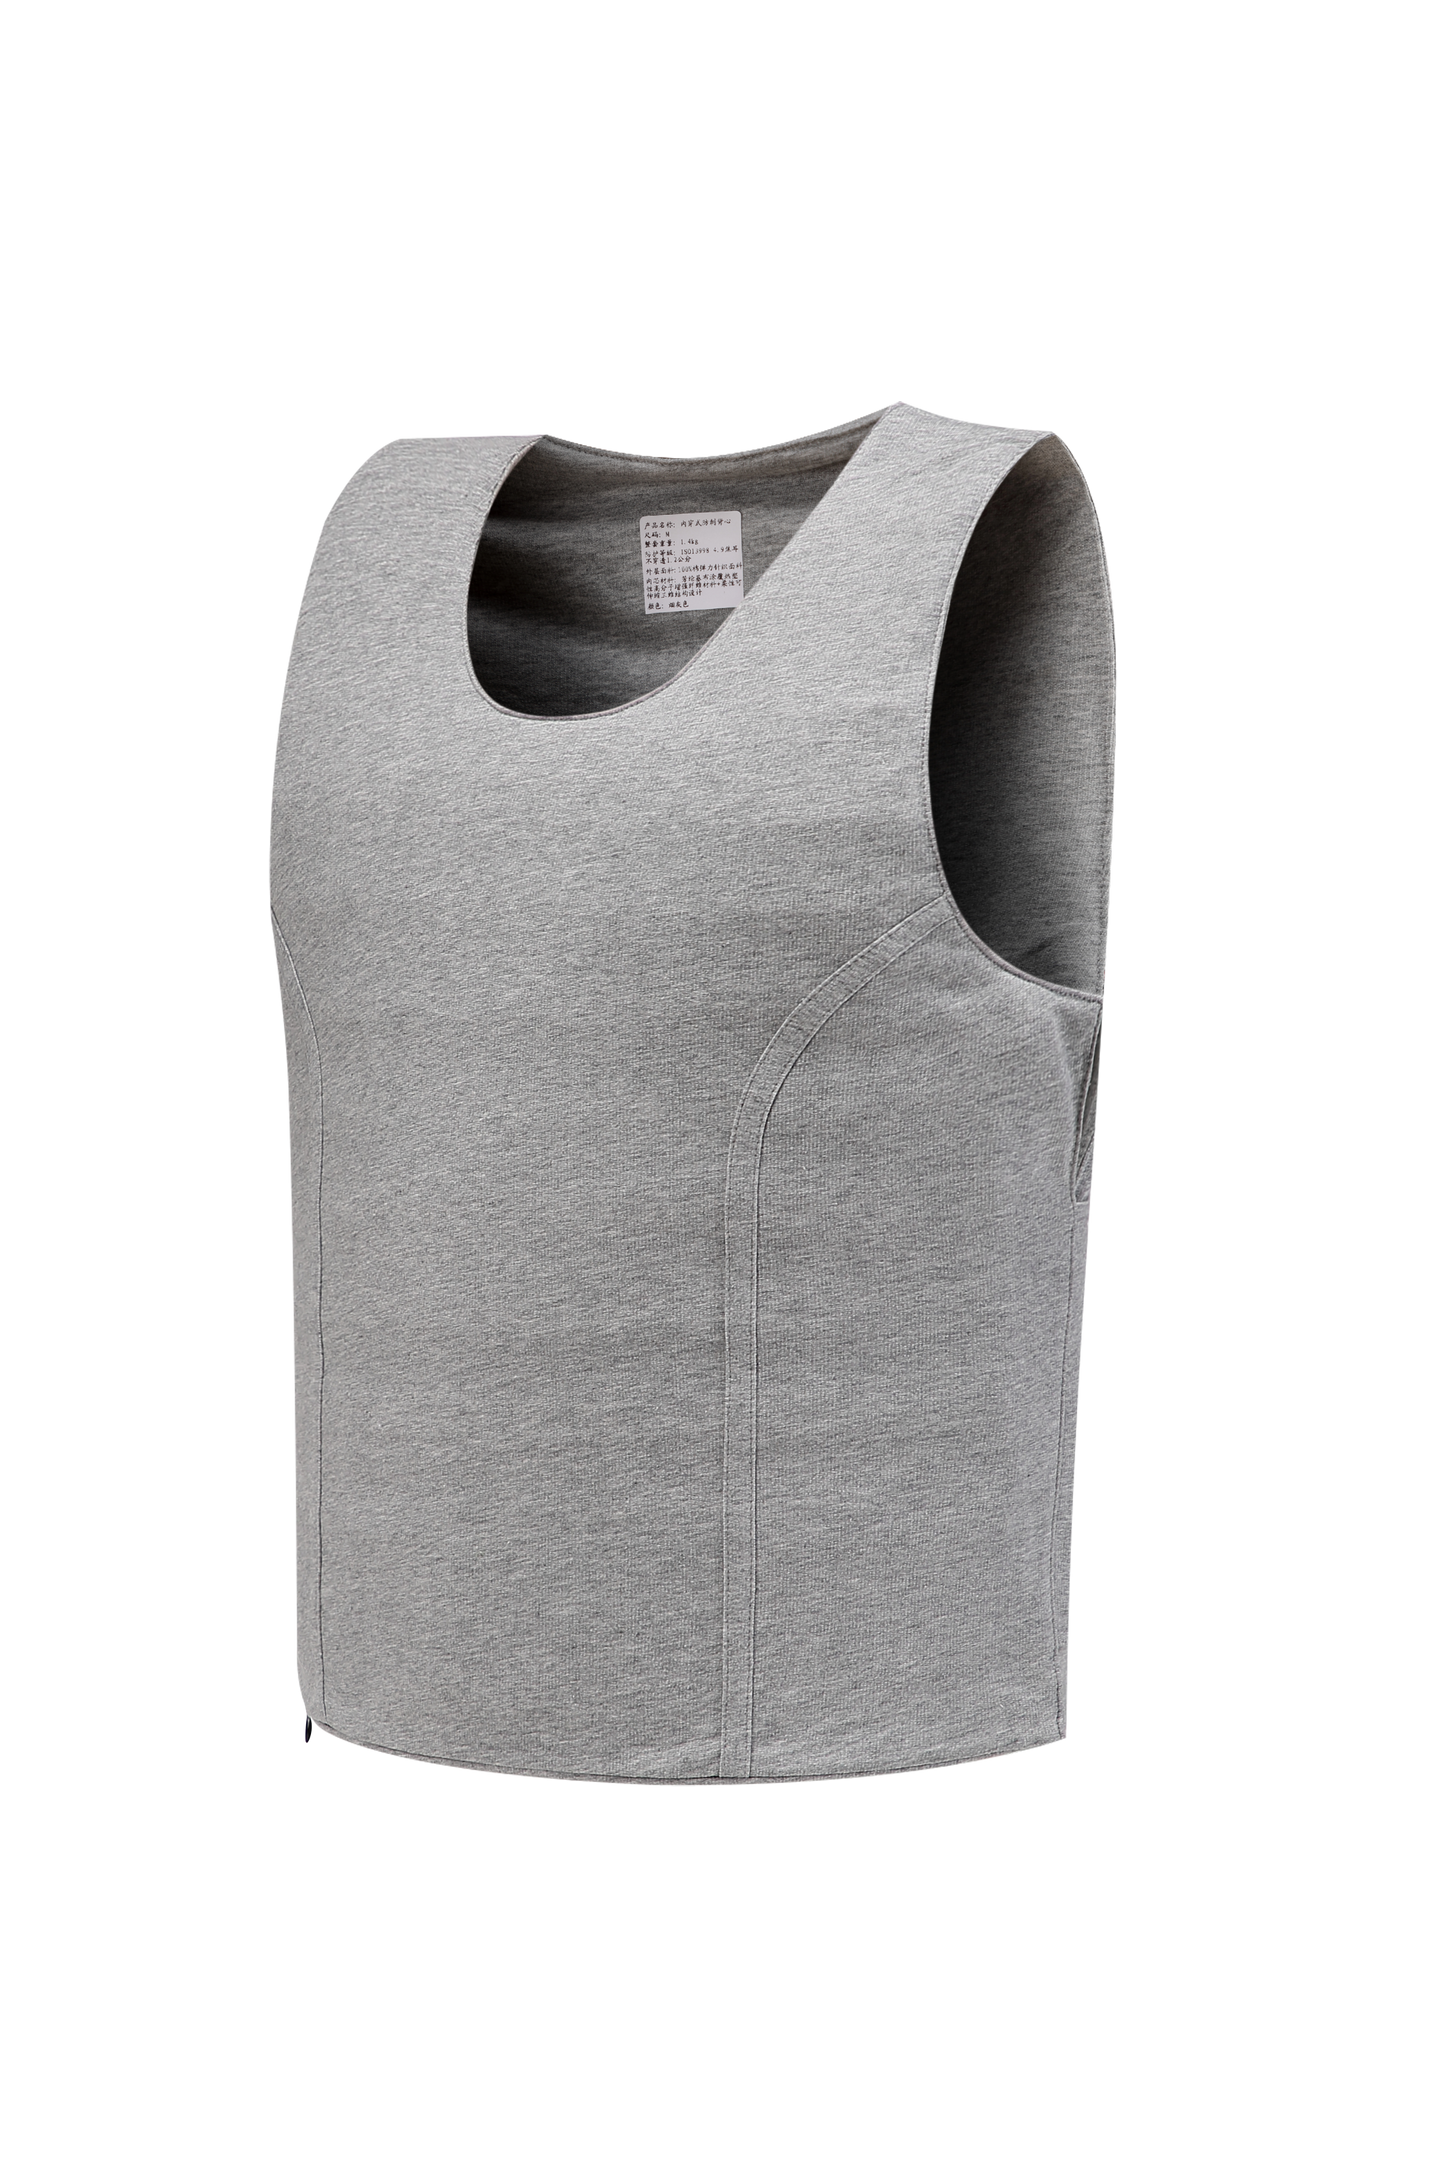 STAND GUARD STAB PROTECTION Concealed Vest - HA-VC01